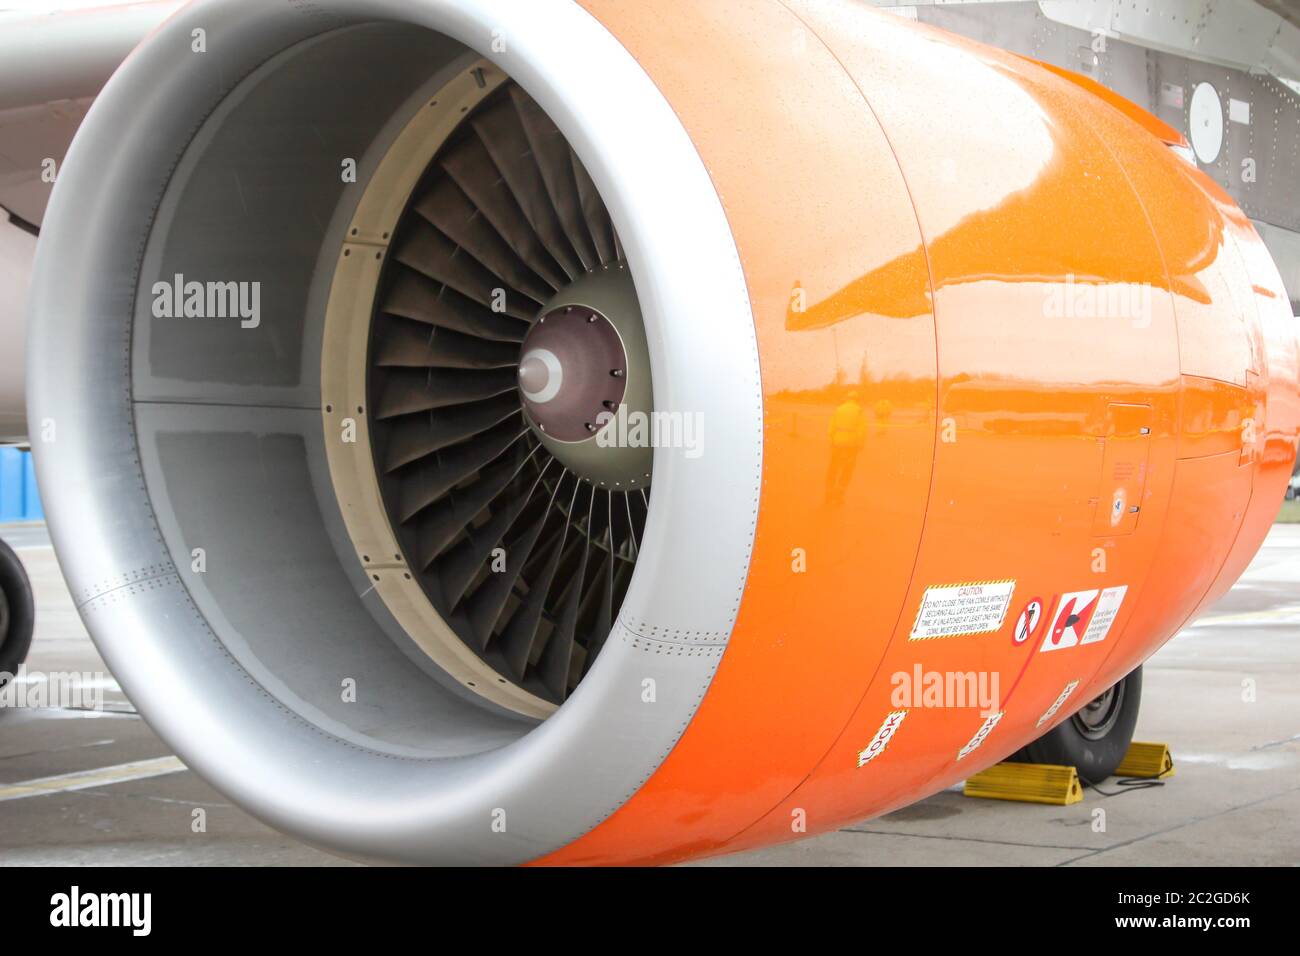 the engine, jet engine of an airplane Stock Photo